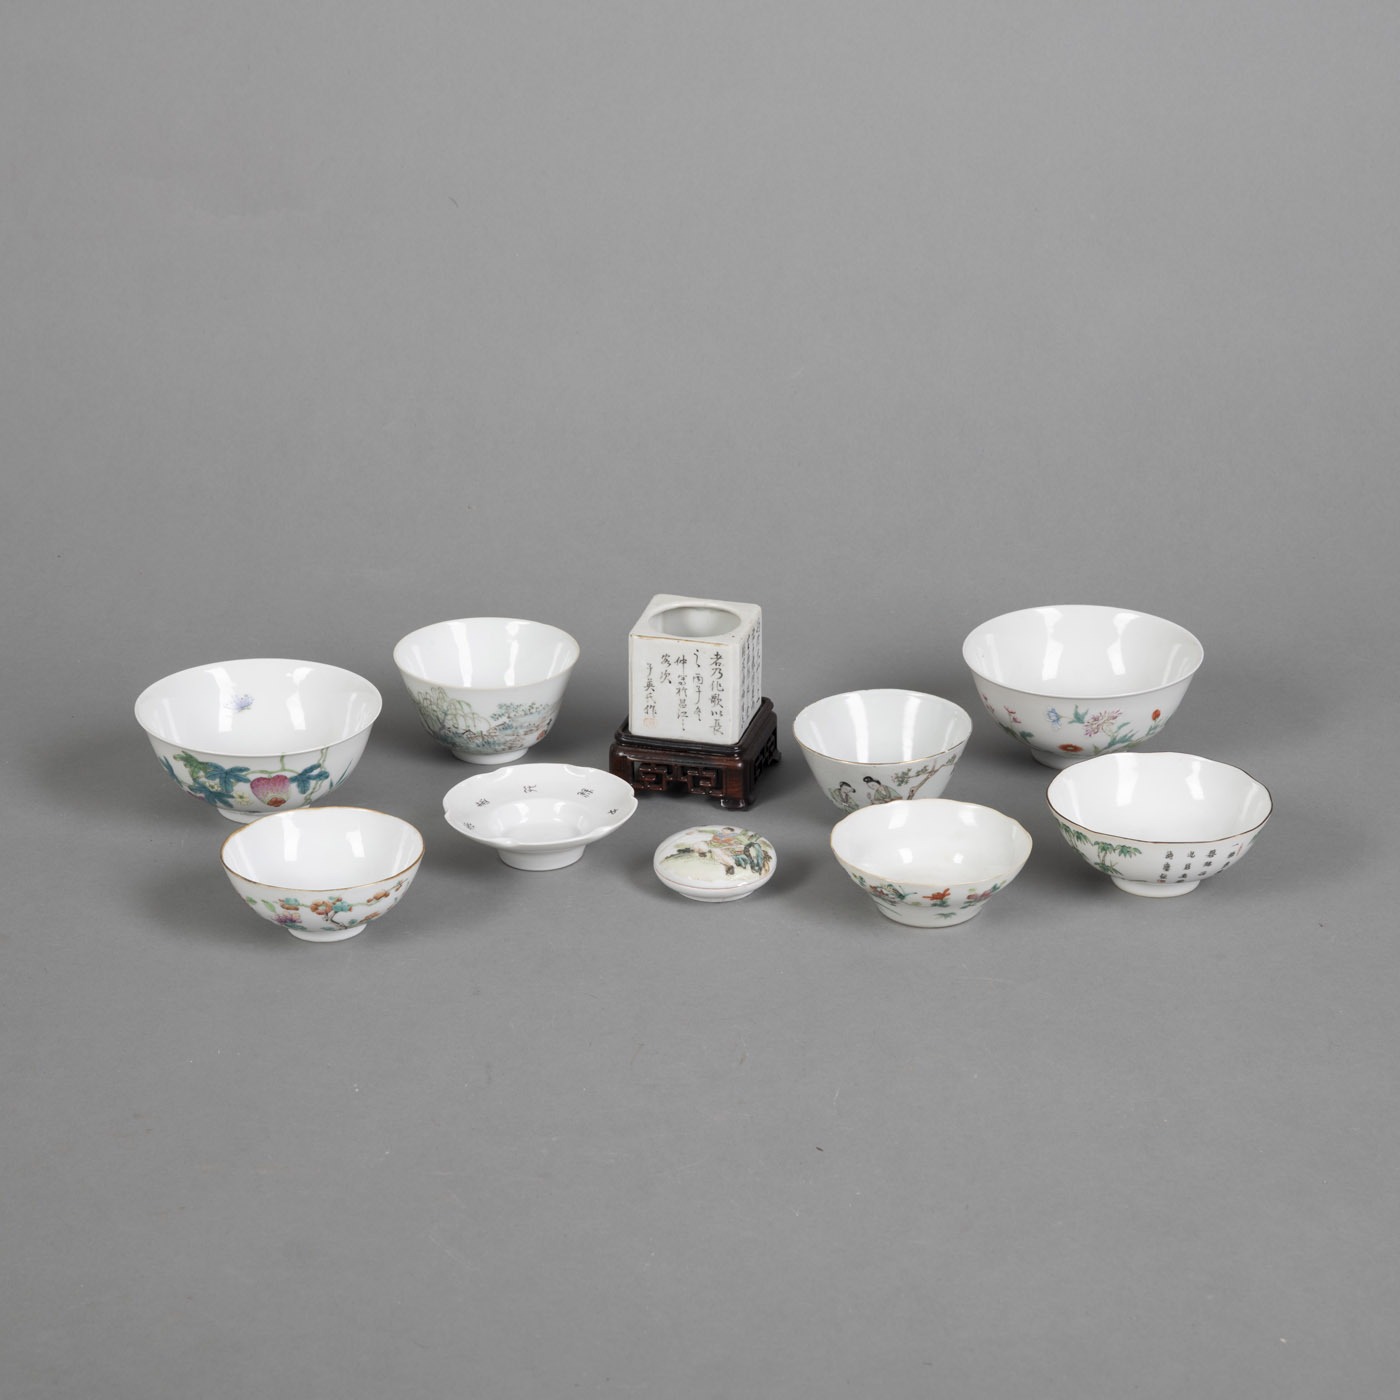 <b>LOT OF PORCELAINS: A BOWL WITH SAUCER, SIX BOWLS, A BOX WITH COVER FOR SEAL PASTA, A SMALL SQUARE BRUSH CUP WITH WOODEN BASE</b>